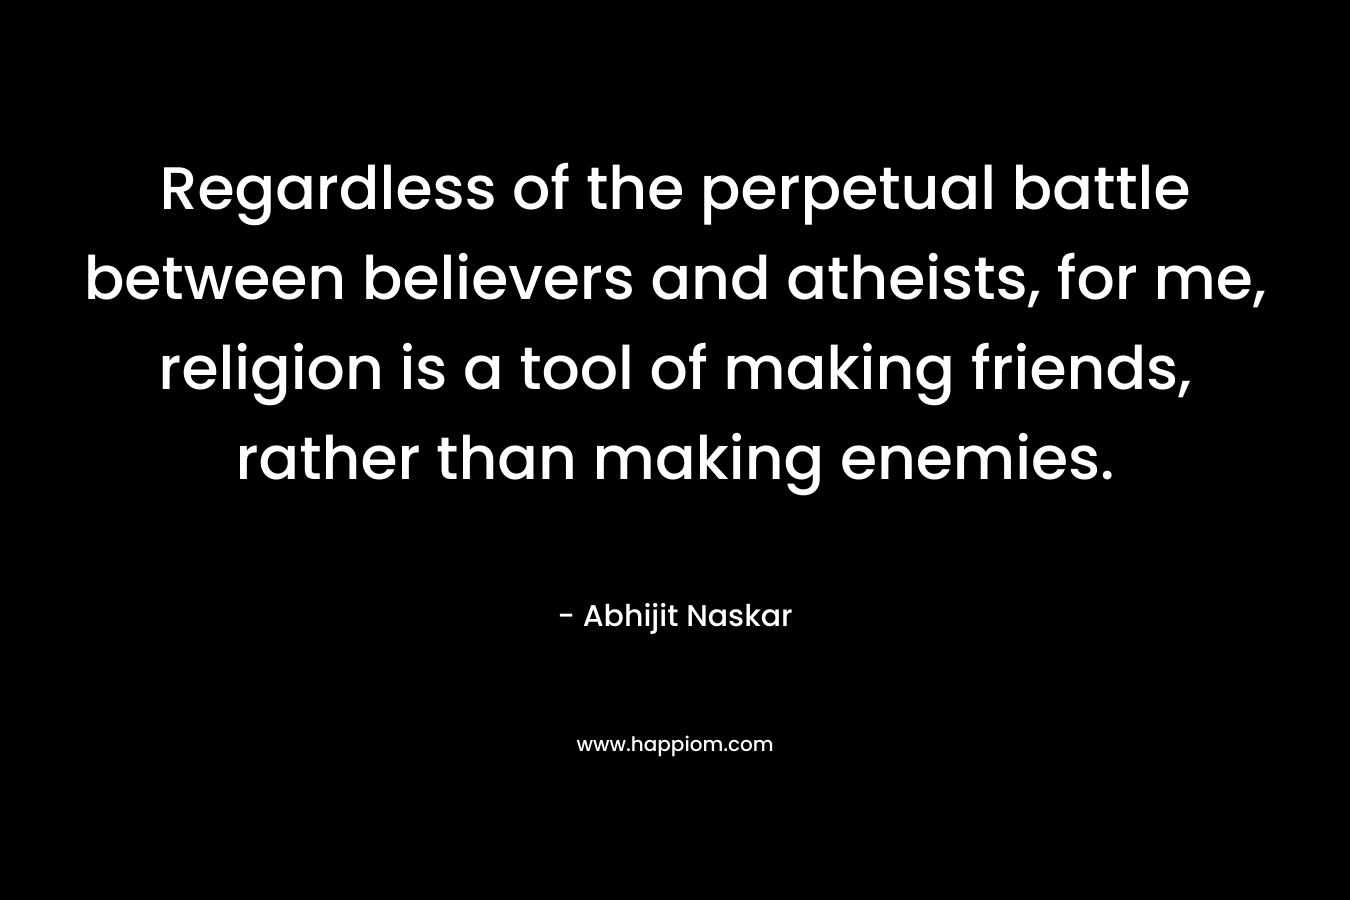 Regardless of the perpetual battle between believers and atheists, for me, religion is a tool of making friends, rather than making enemies.